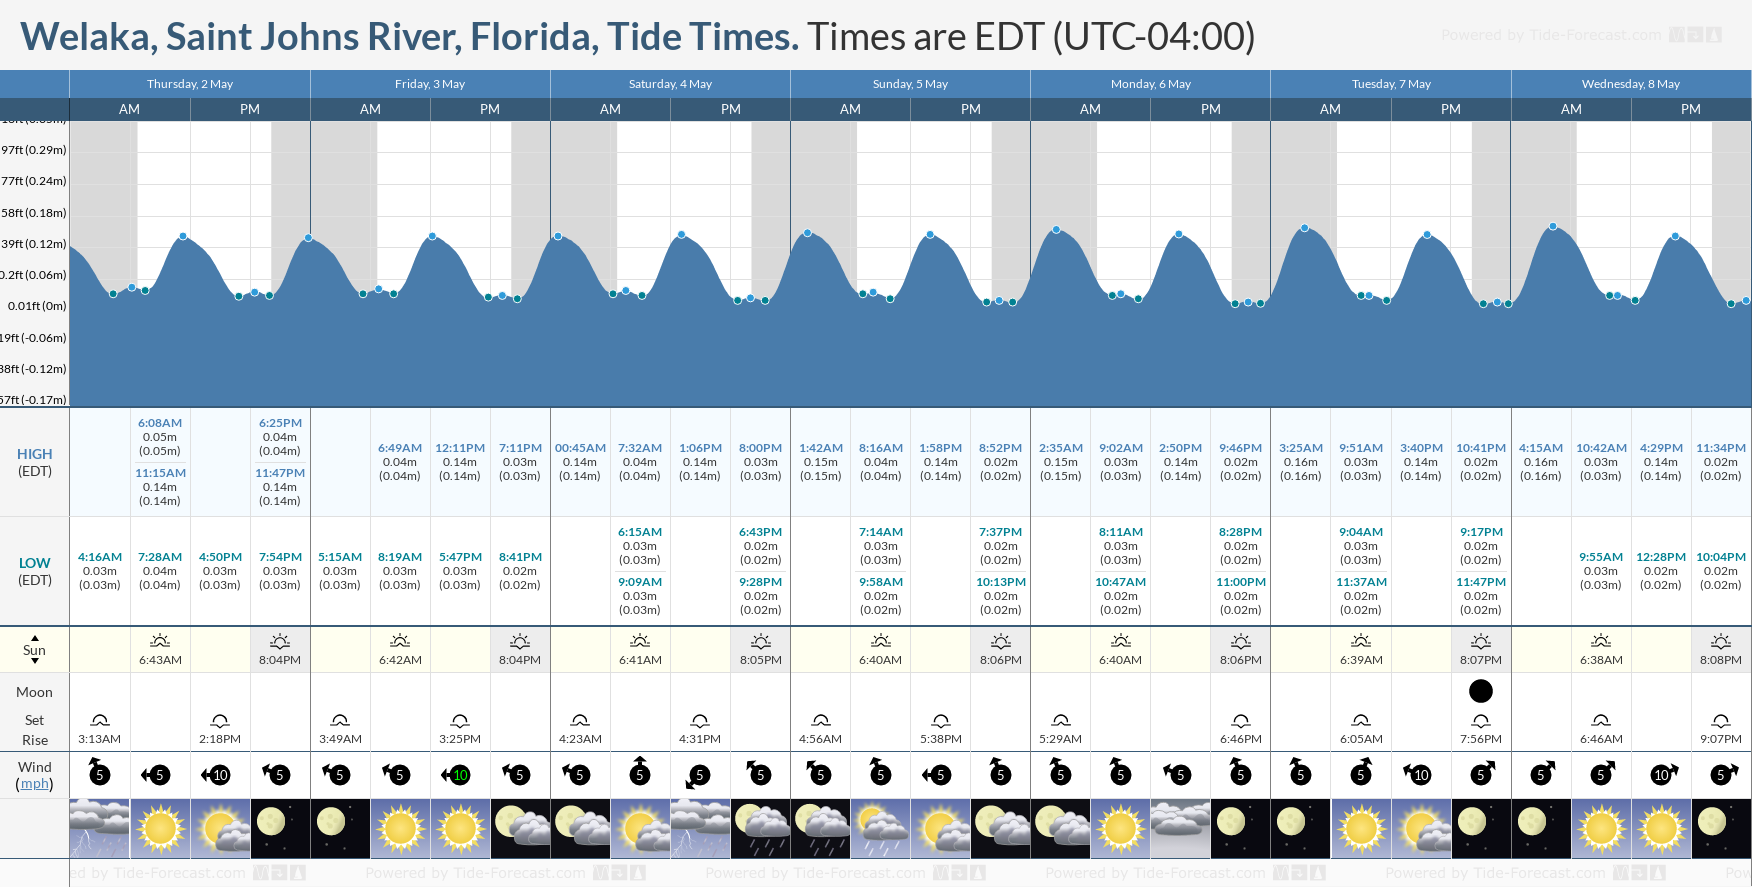 Welaka, Saint Johns River, Florida Tide Chart including high and low tide tide times for the next 7 days